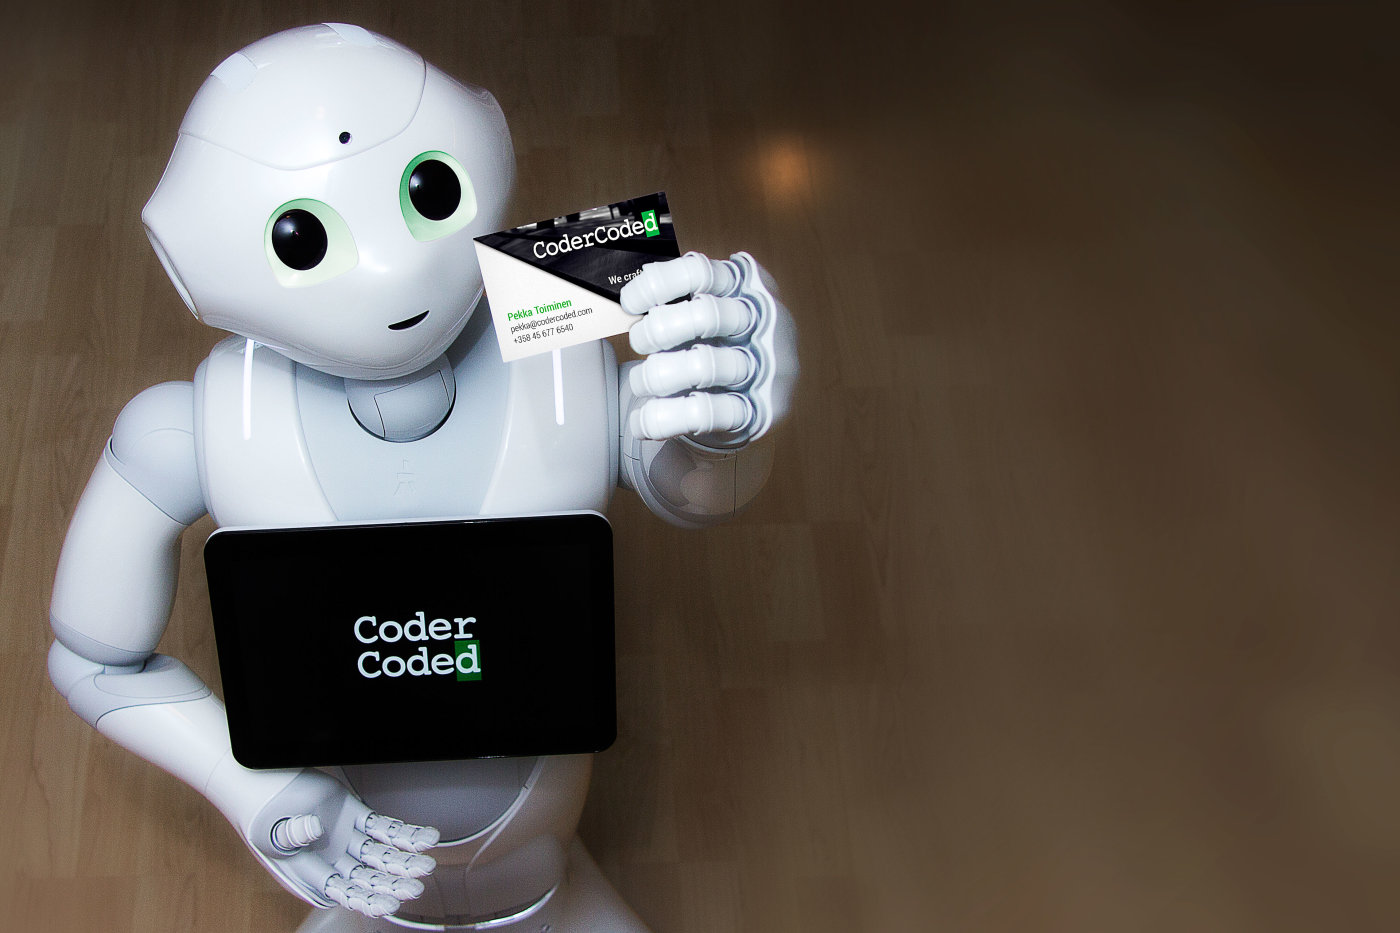 Pepper is the most advanced humanoid robot currently available